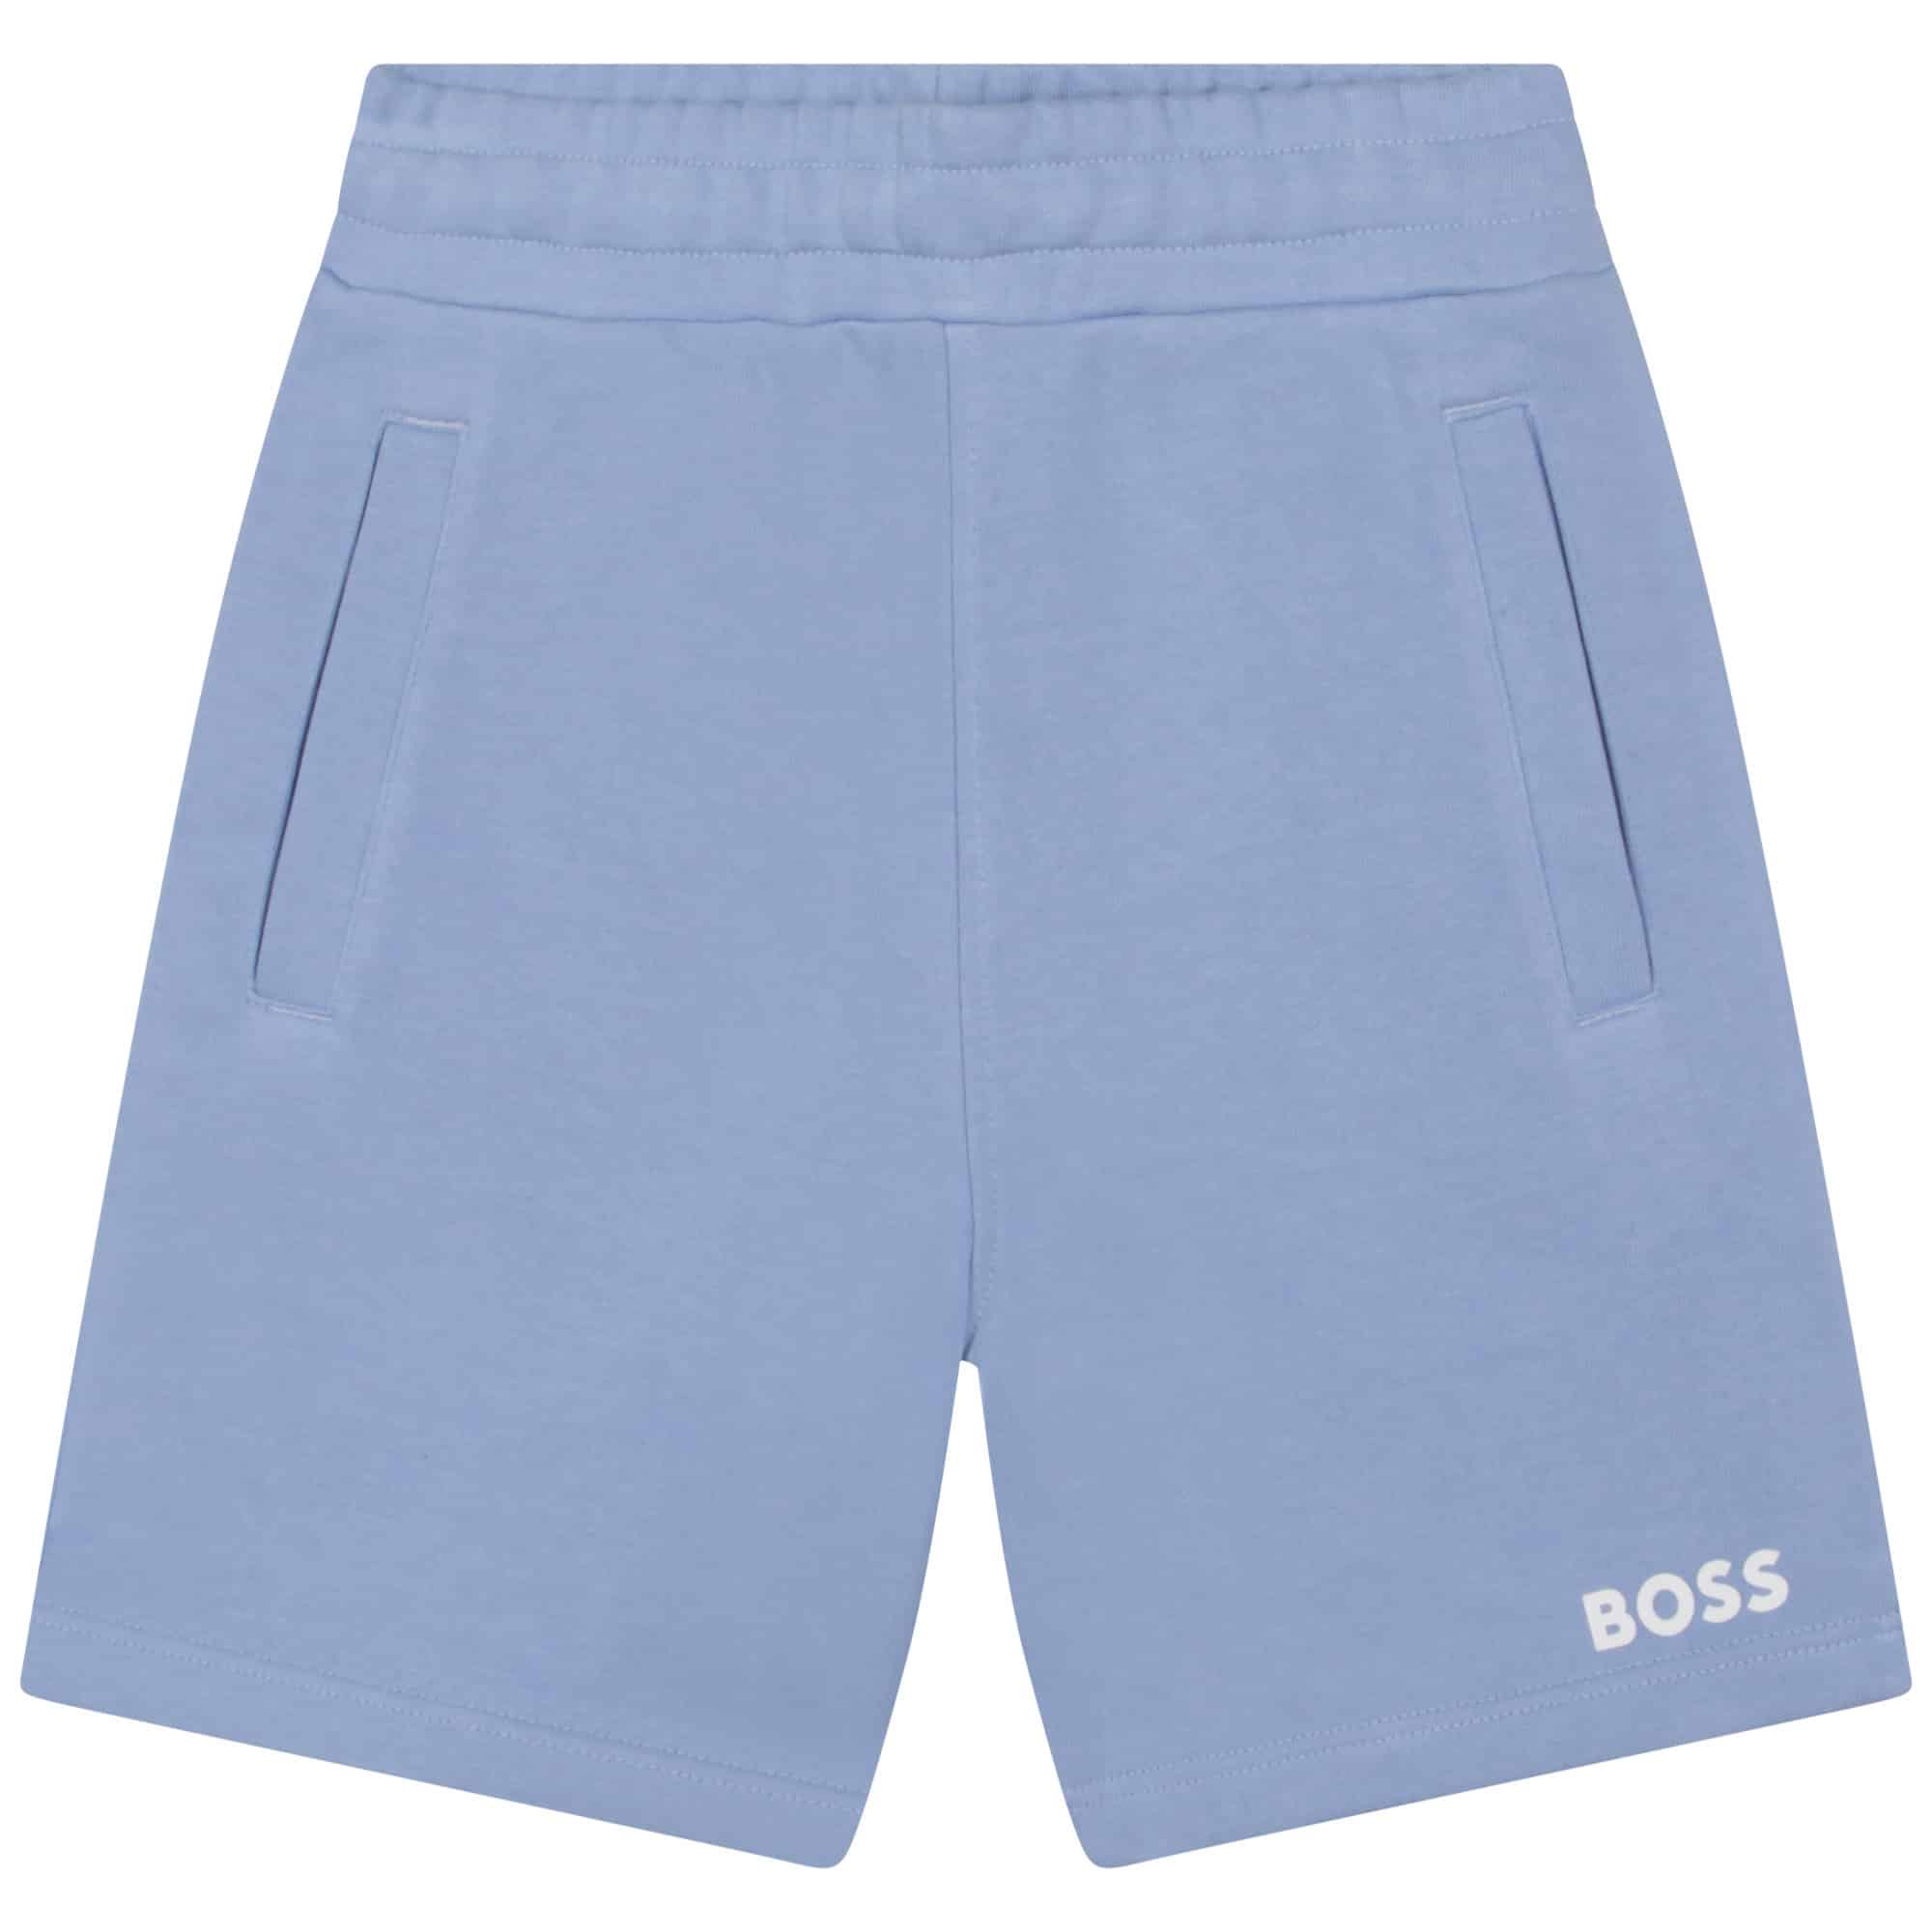 Boss boys blue shorts front view